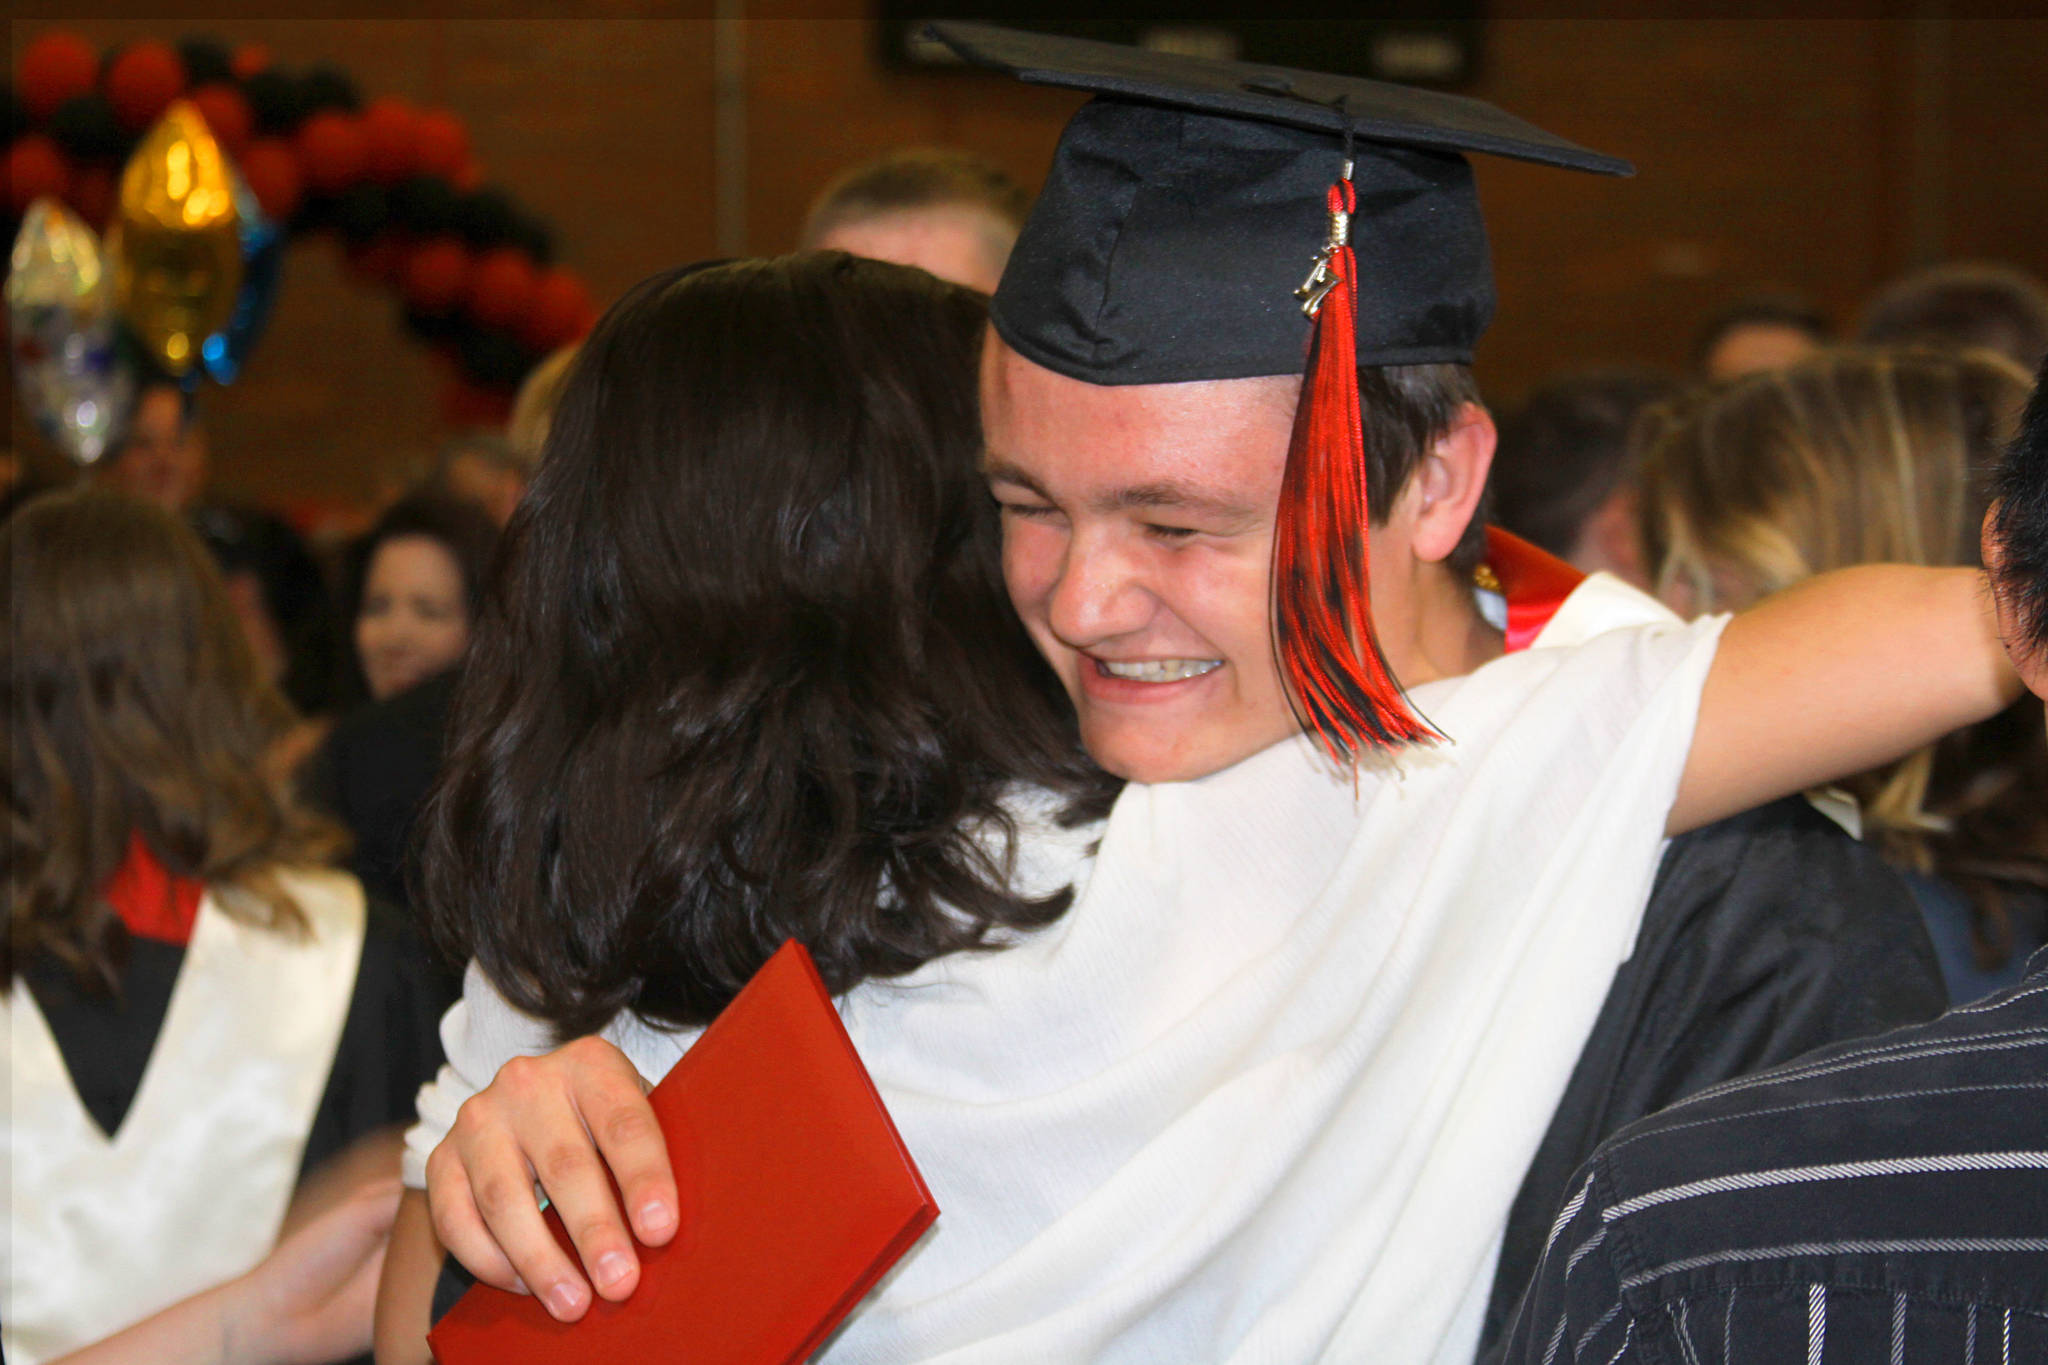 Grey Rische gets a hug following the commencement ceremony for Coupeville High School’s Class of 2017 Friday night, June 9, 2017. Photo by Ron Newberry/Whidbey News-Times